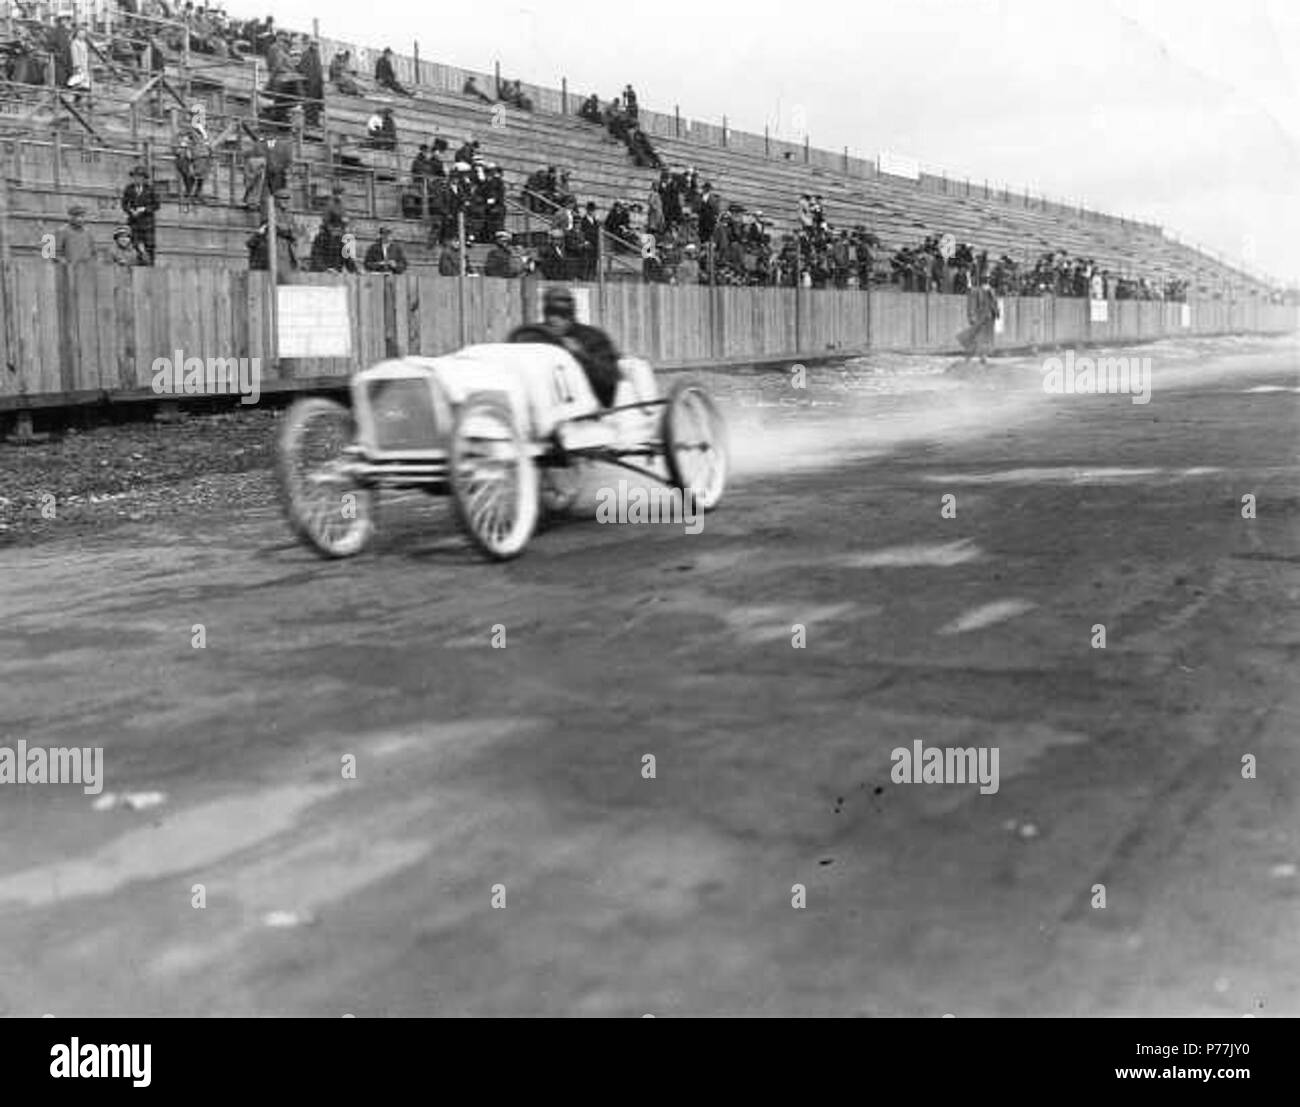 English: This unidentified driver is believed to be piloting a 'cycle carriage' or car during speed trials at the Tacoma Speedway in September of 1914. There were 14 entries, mostly from Southern California and including future star Harry Hartz, for the Labor Day races. Four of the junior drivers were from Tacoma. Vehicles had to reach a speed of 40 mph to qualify. These cars had for the most part motorcycle engines and were smaller than regular race cars. Although days preceding the event were dry, the Labor Day race was cancelled due to rain and a rescheduled race the following week was also Stock Photo